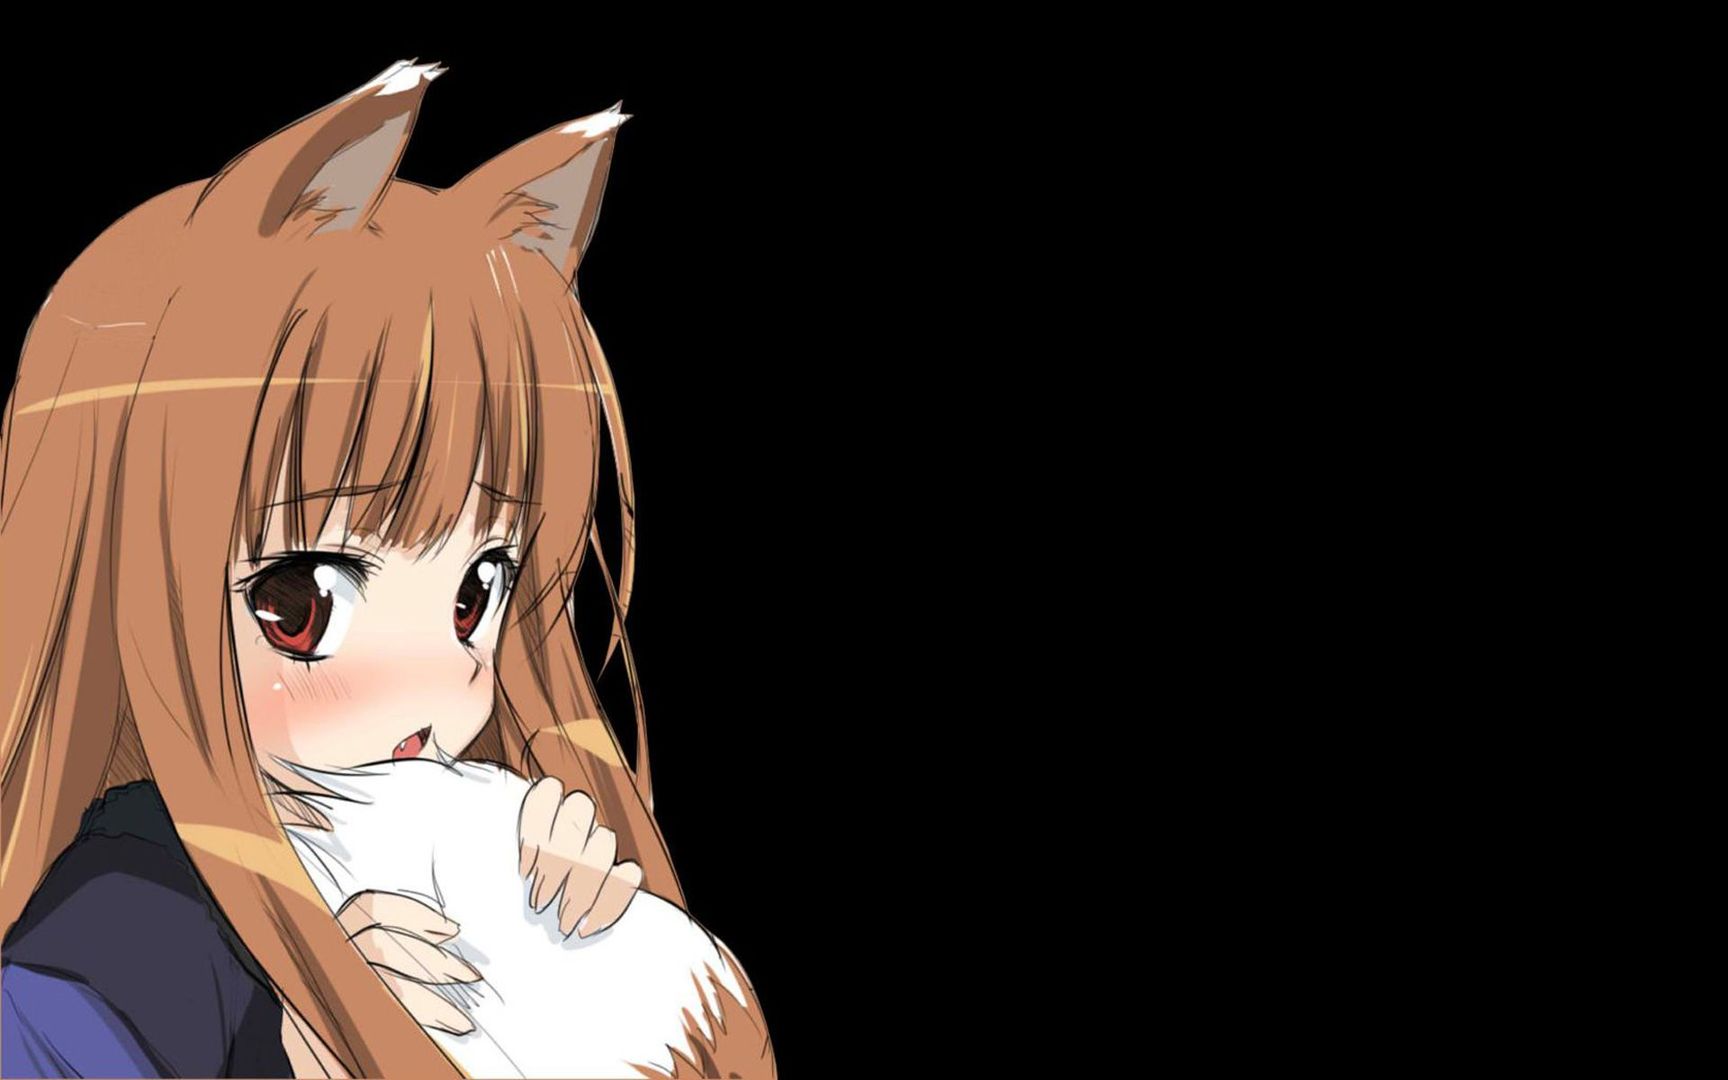 [48+] Spice and Wolf Wallpapers | WallpaperSafari